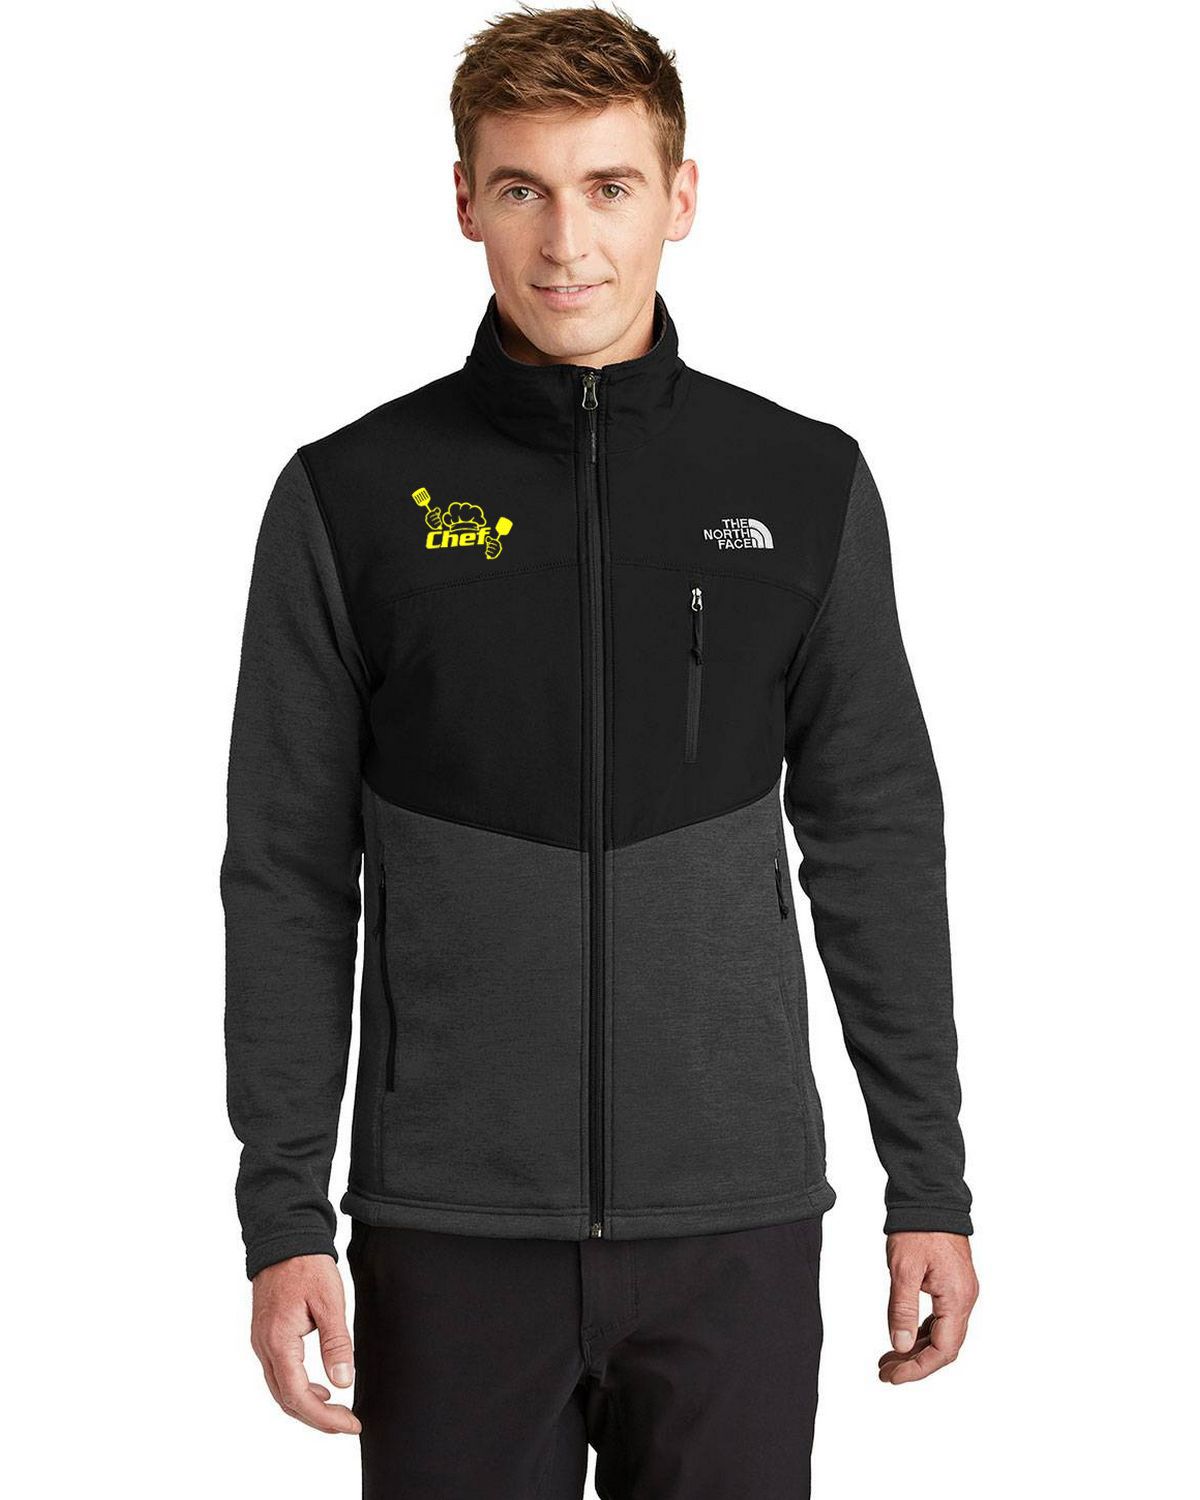 The North Face NF0A3LH6 Mens Far North Fleece Jacket